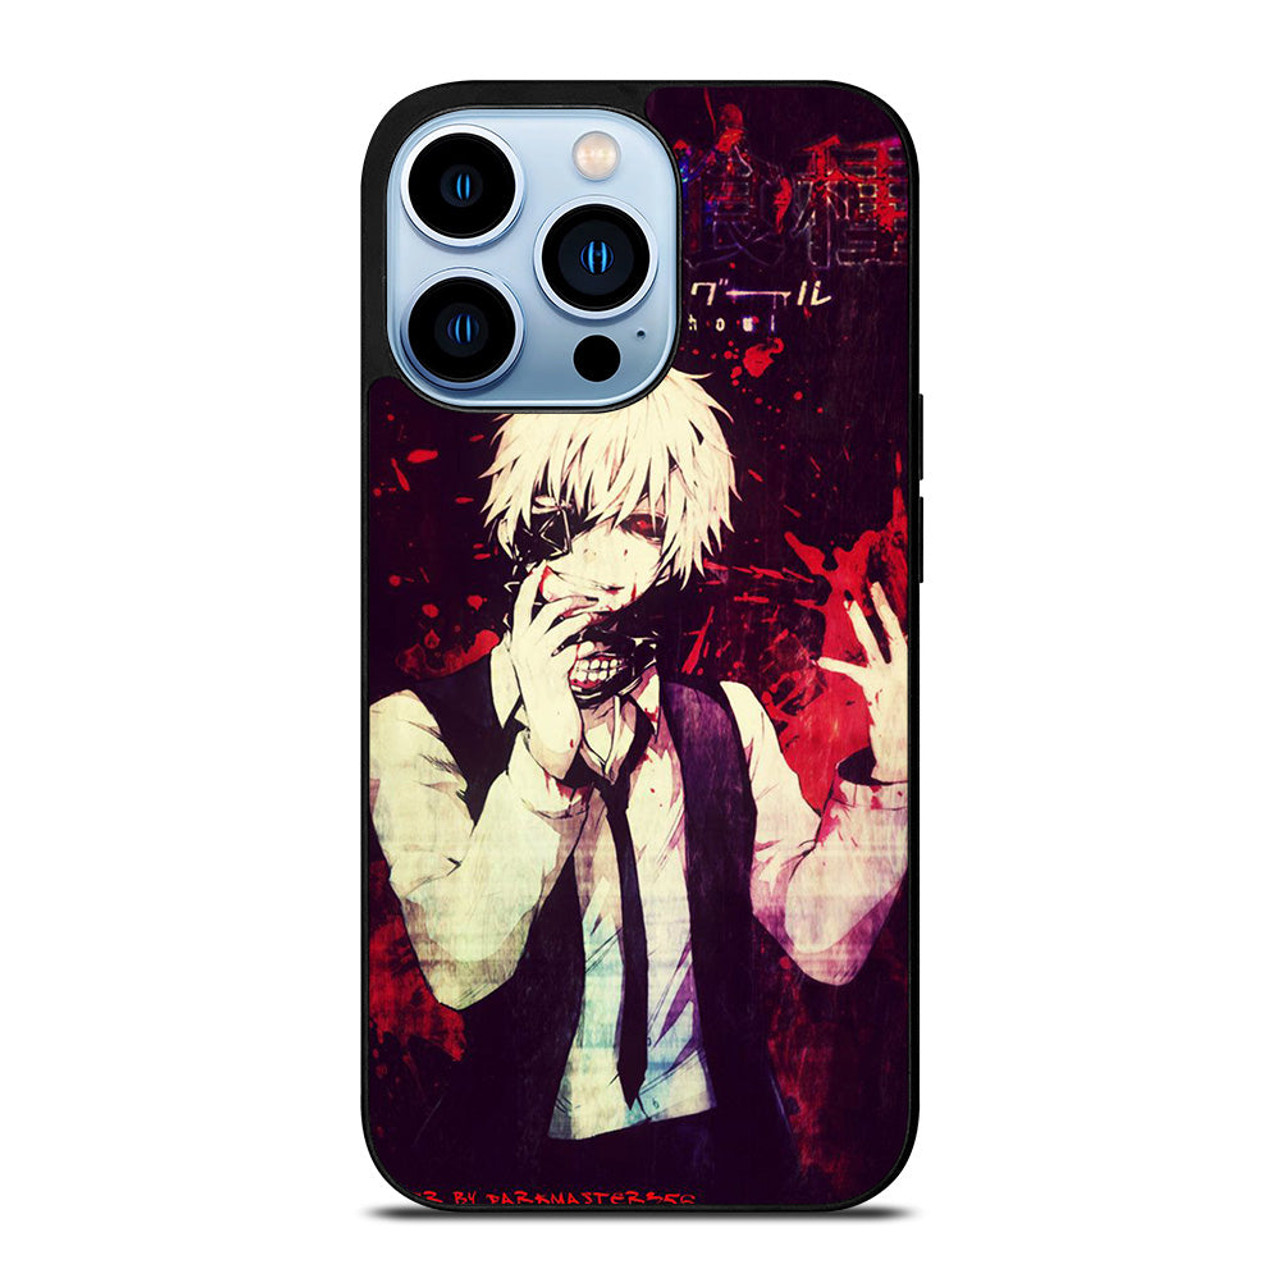 TOKYO GHOUL KANEKI ANIME iPhone 13 Pro Max Case Cover